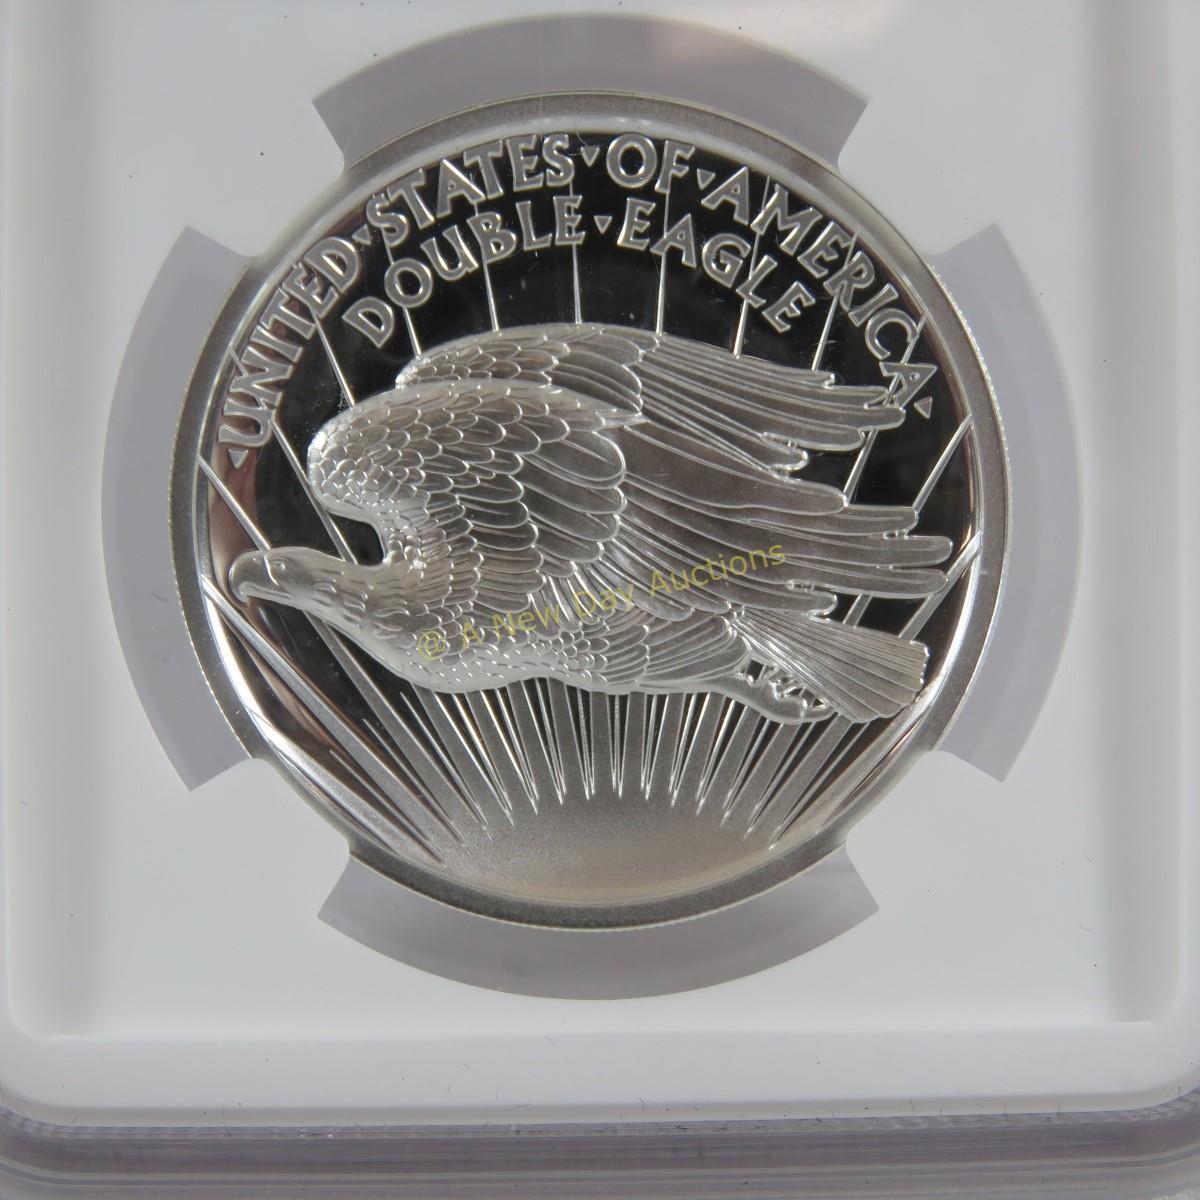 2017 Double Eagle Indian High Relief NGC Gem Proof